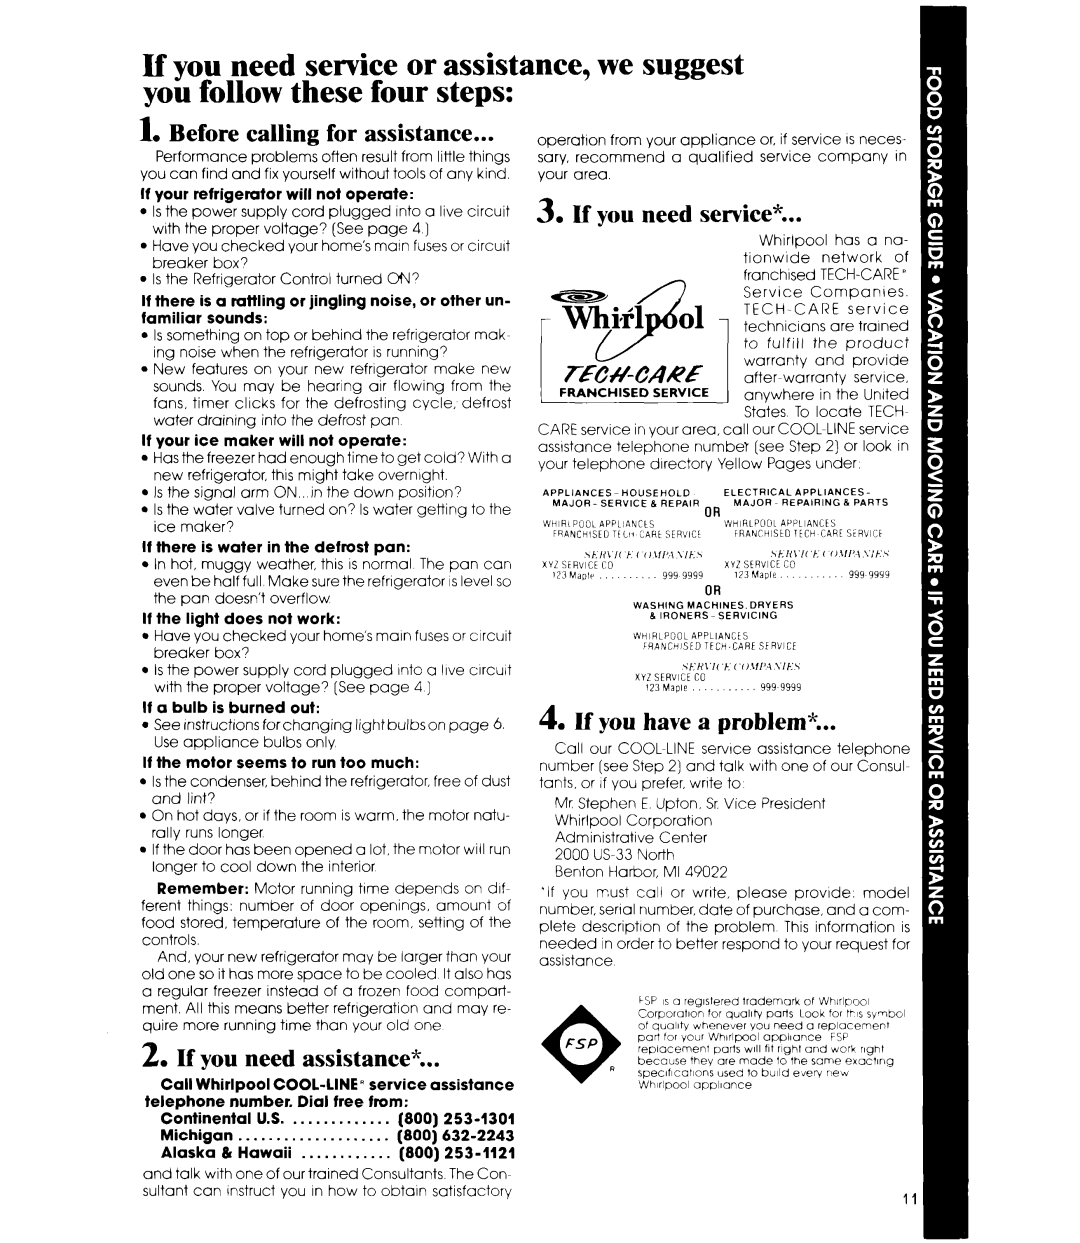 Whirlpool ETIGJM manual Before calling for assistance, If you need assistance, If you need service, If you have a problem 